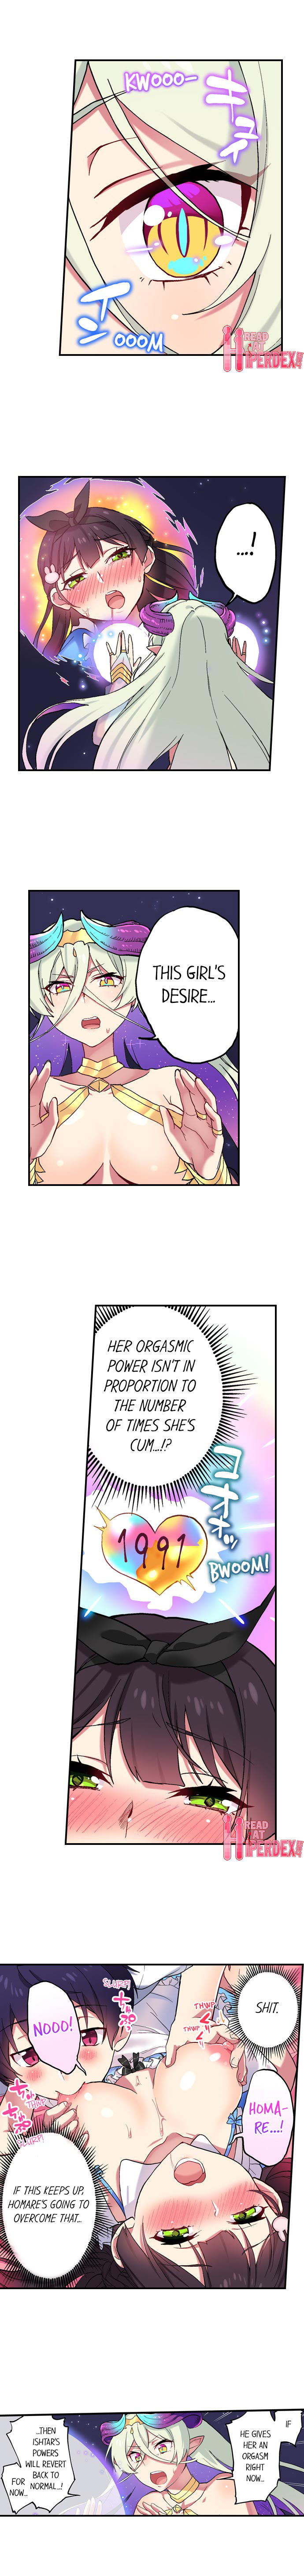 Committee Chairman, Didn’t You Just Masturbate In the Bathroom? I Can See the Number of Times People Orgasm - Chapter 92 Page 5